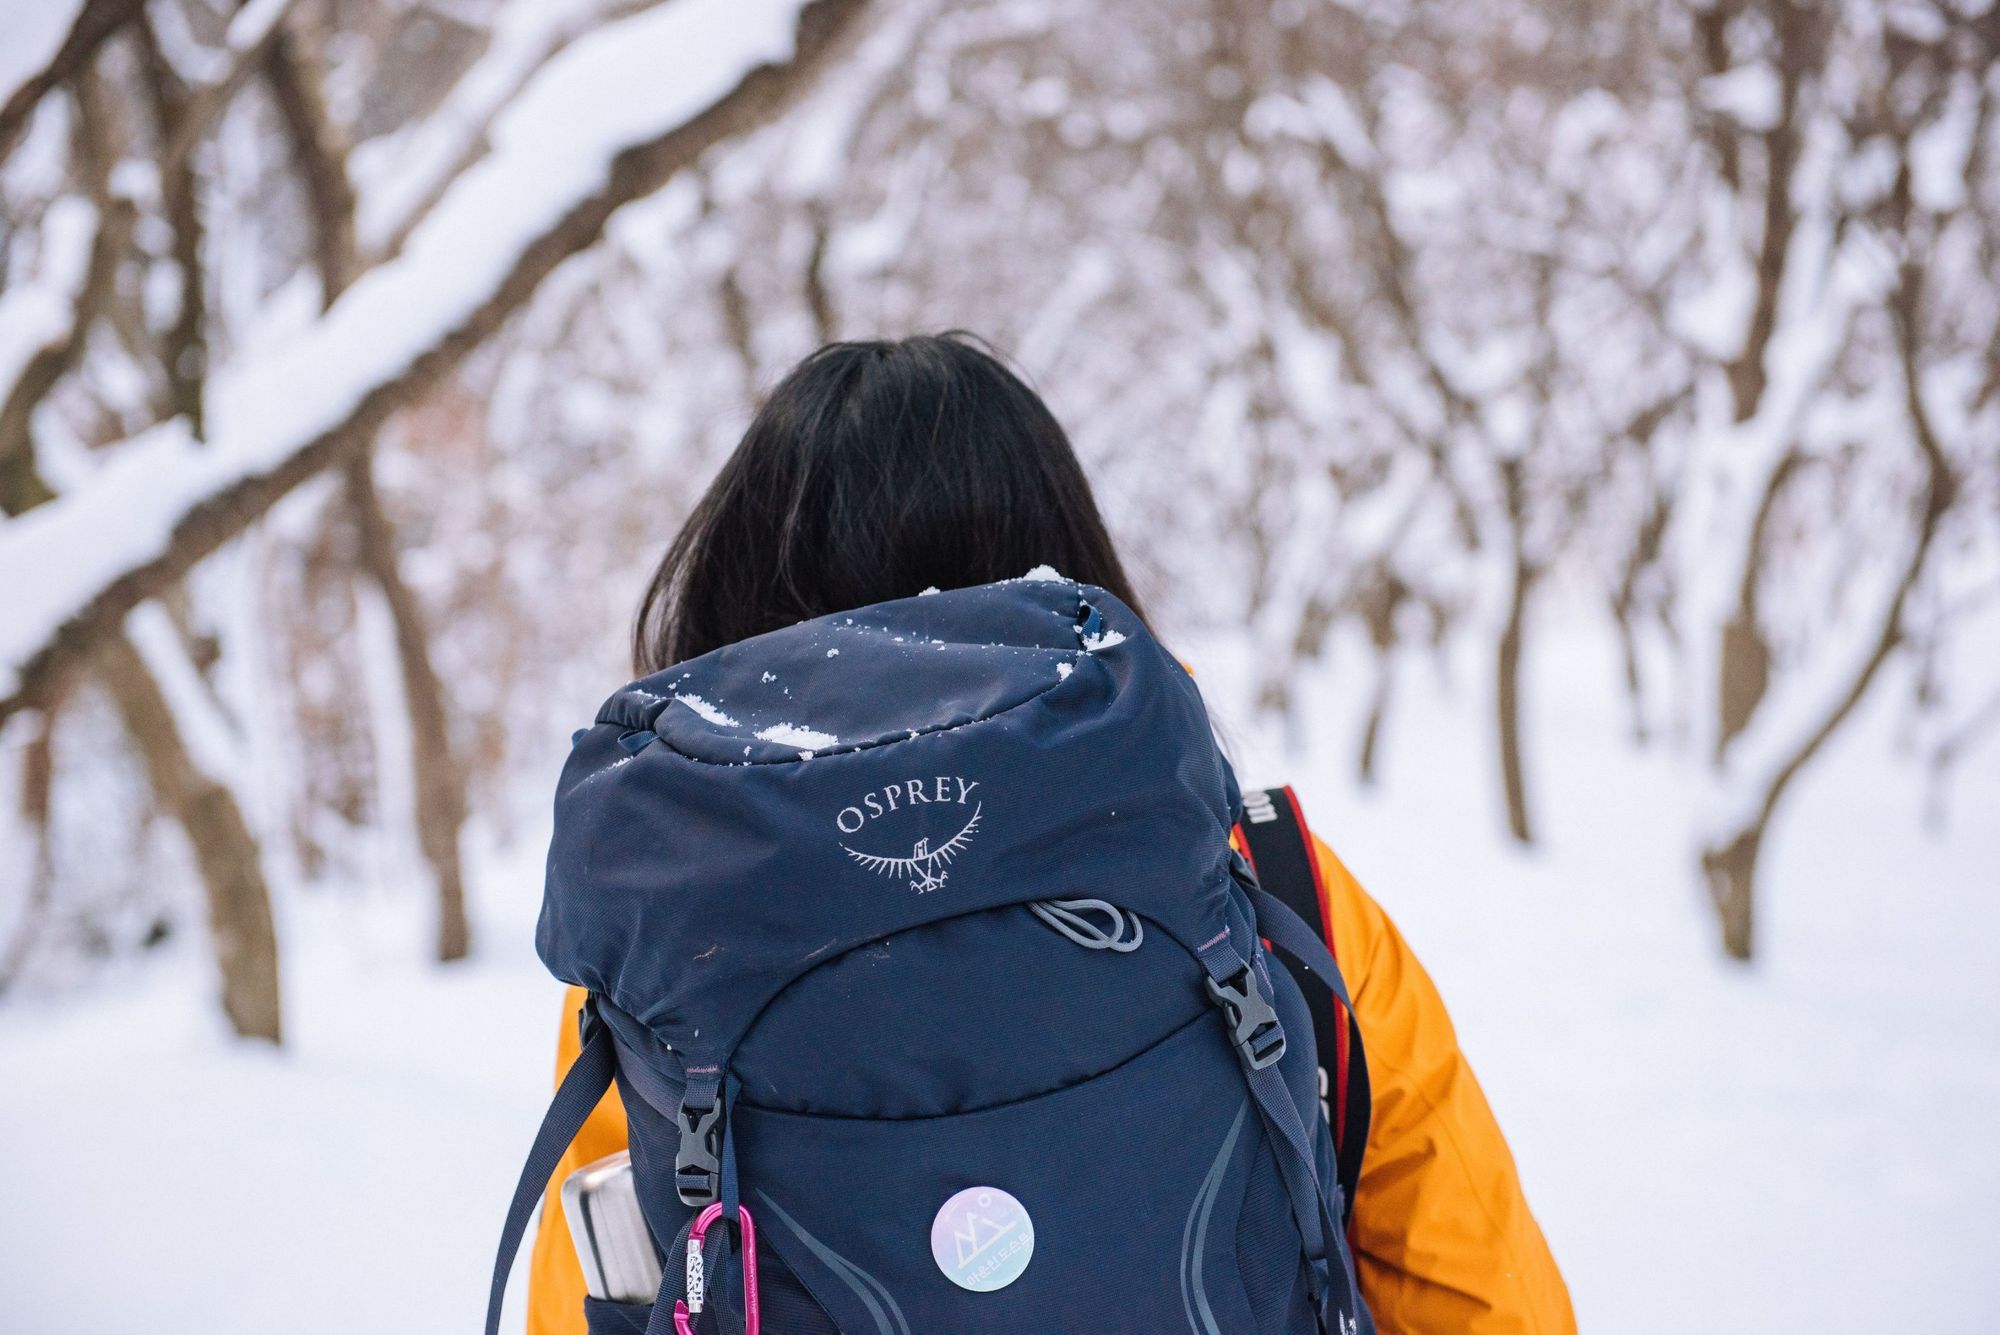  Winter tourist backpack